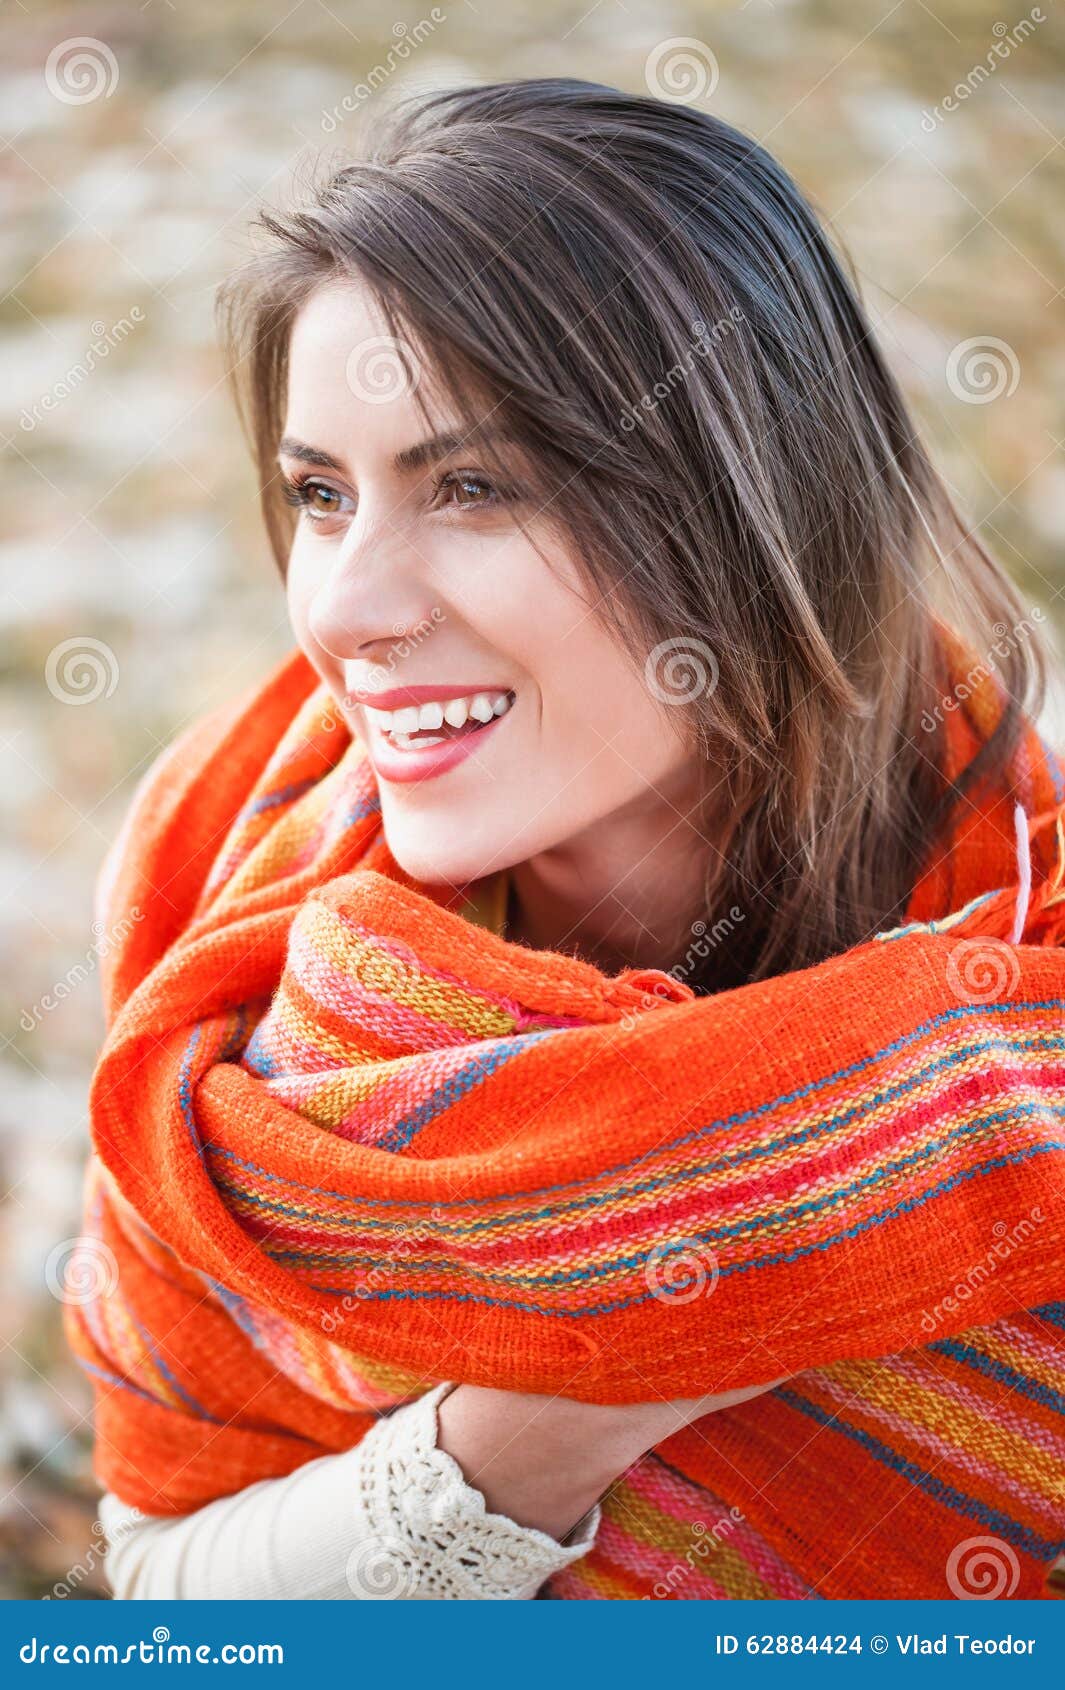 Happy in nature - happy-nature-portrait-young-laughing-woman-relaxing-beautiful-evening-autumn-park-colorful-scarf-her-neck-62884424